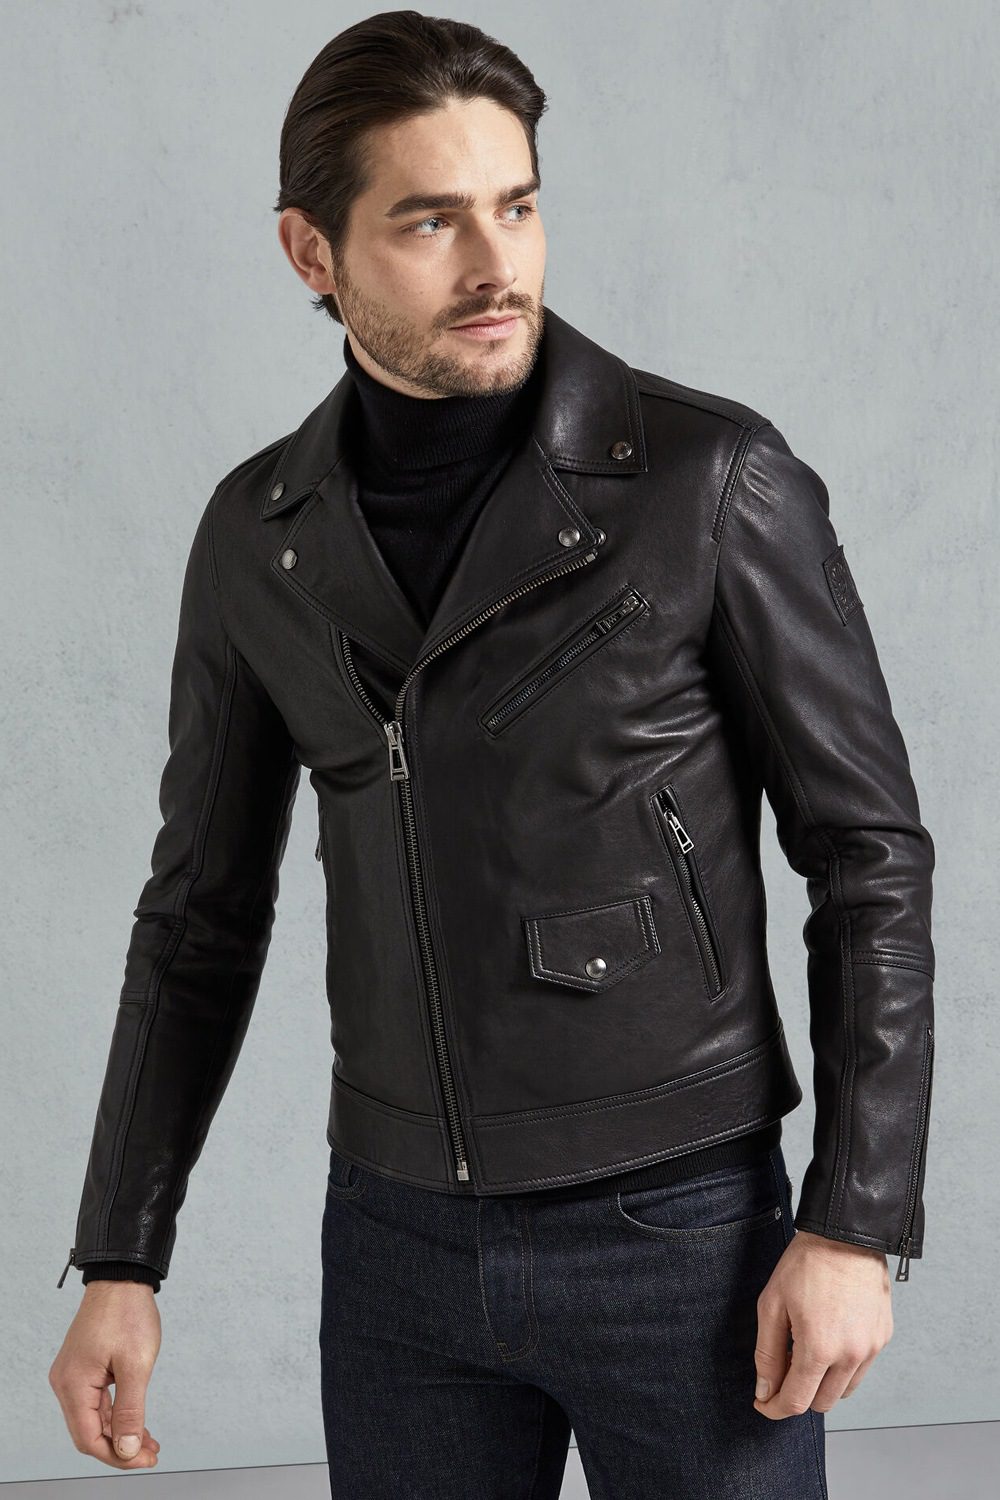 The Best Leather Jacket Brands For Men, Who Makes Good Leather Jackets